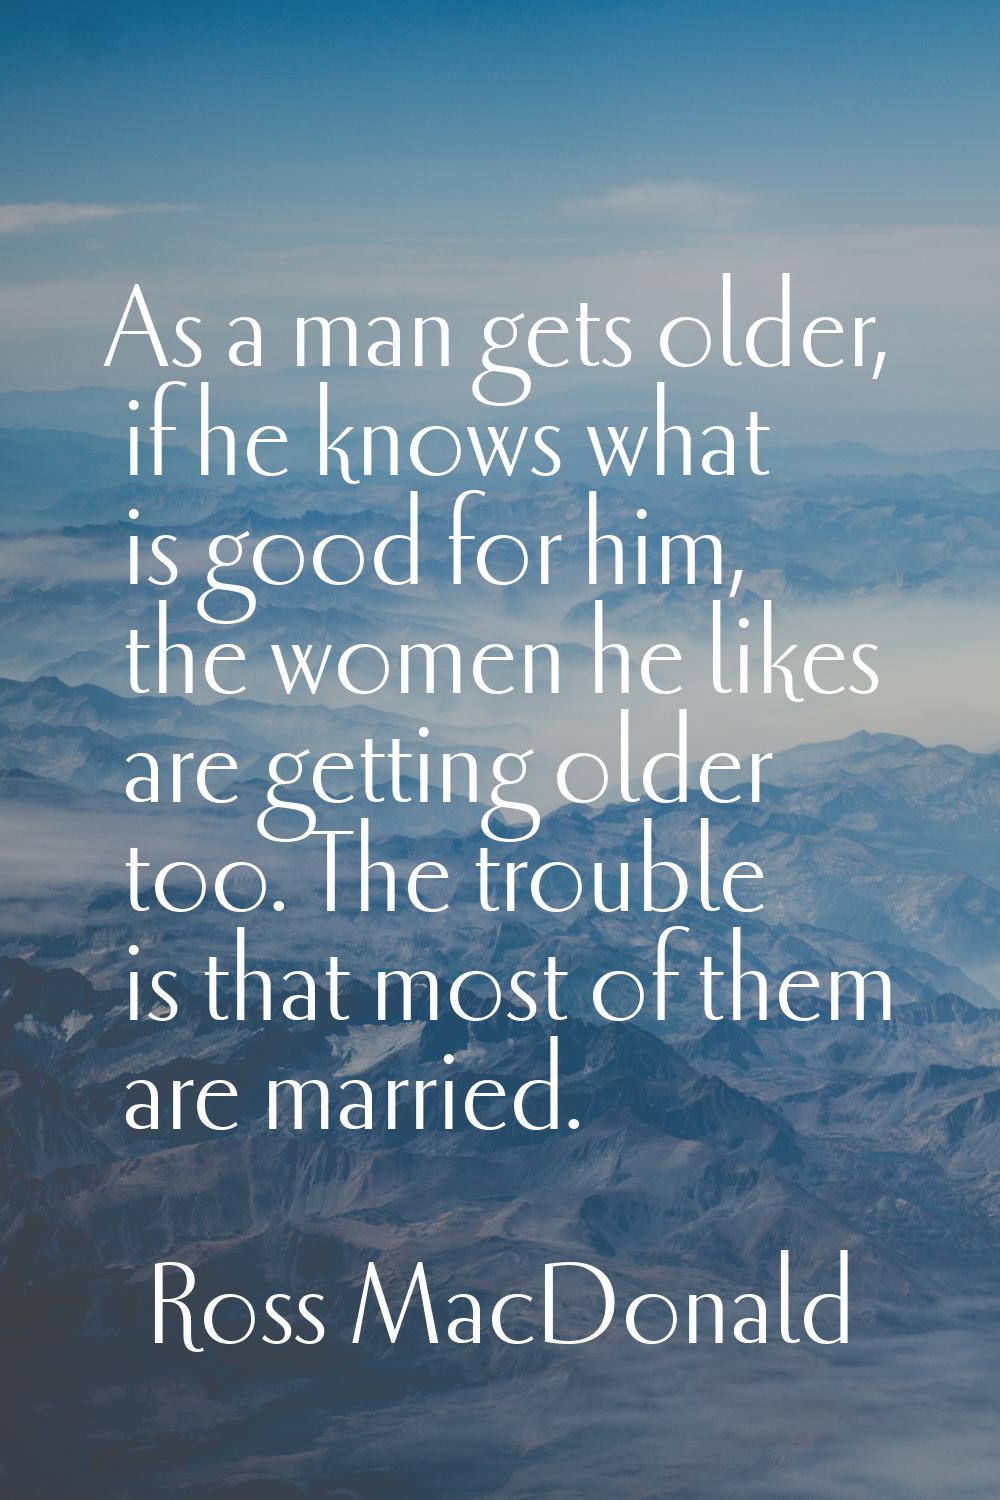 As a man gets older, if he knows what is good for him, the women he likes are getting older too. Th